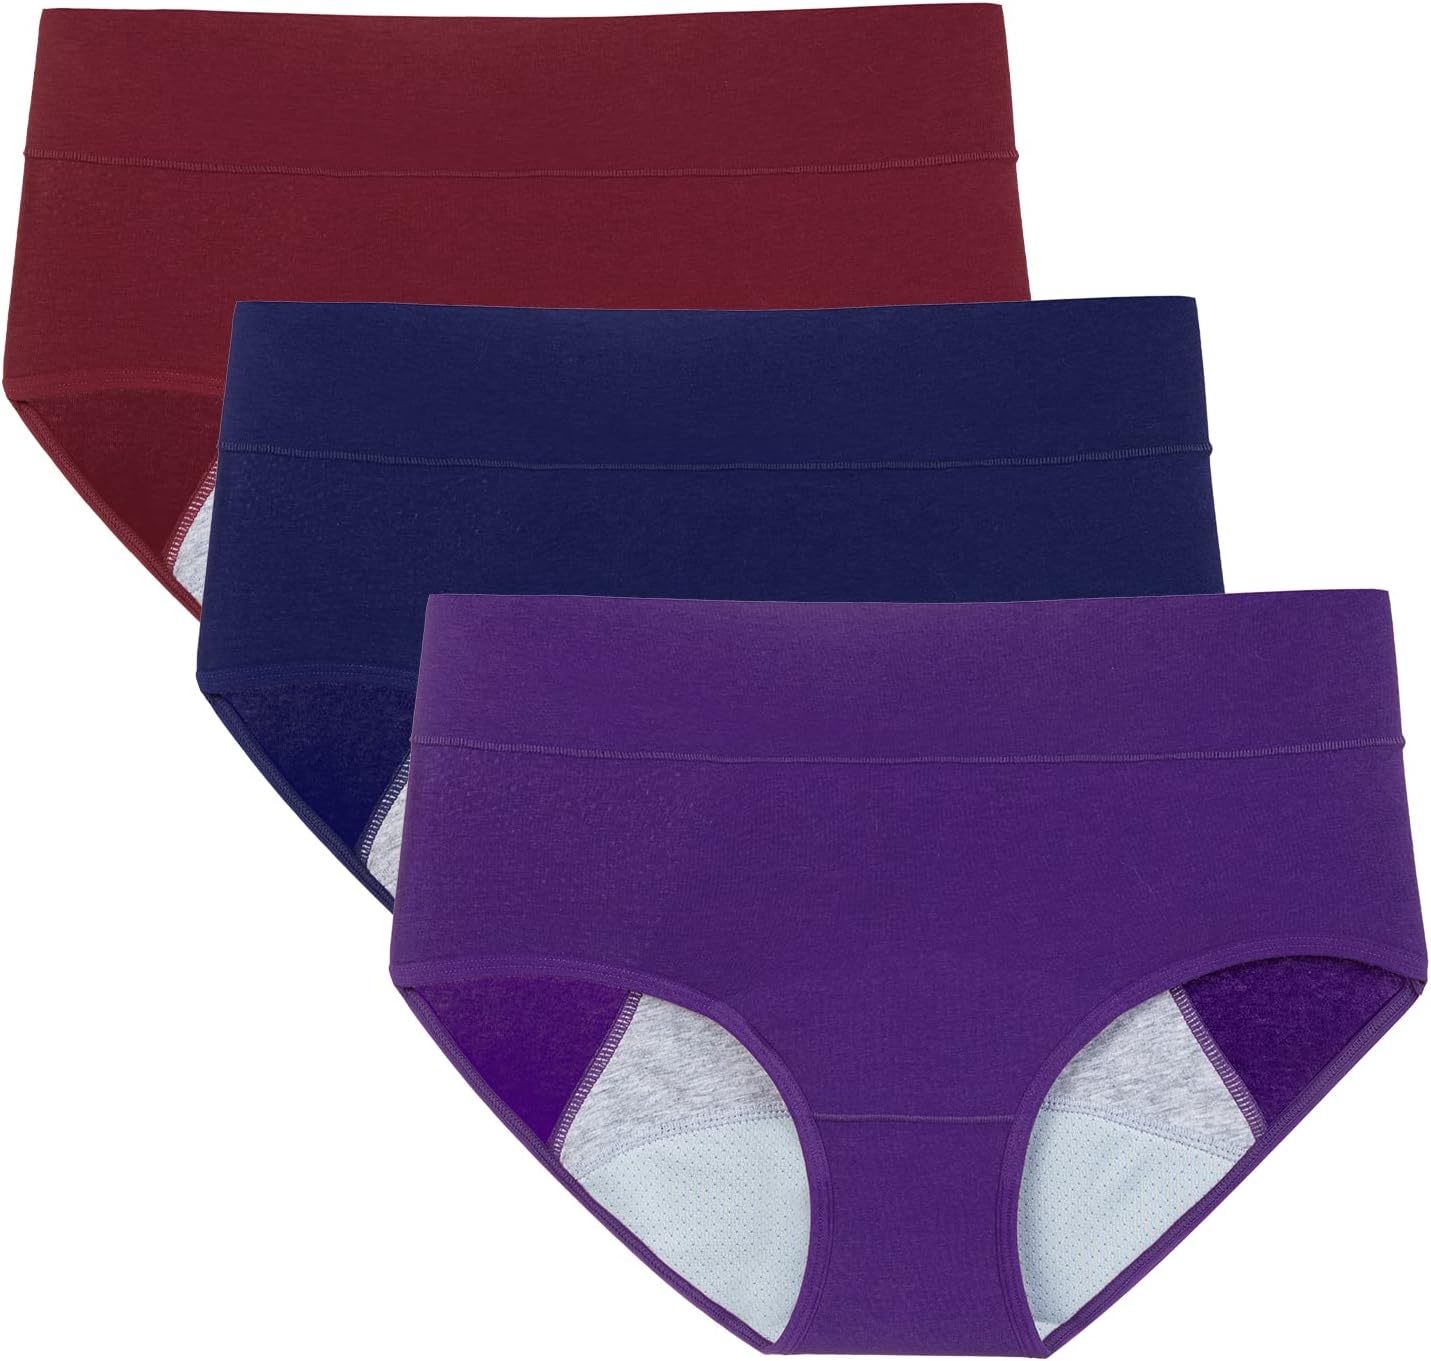 Best Female Incontinence Products POKARLA Women’s Incontinence Underwear